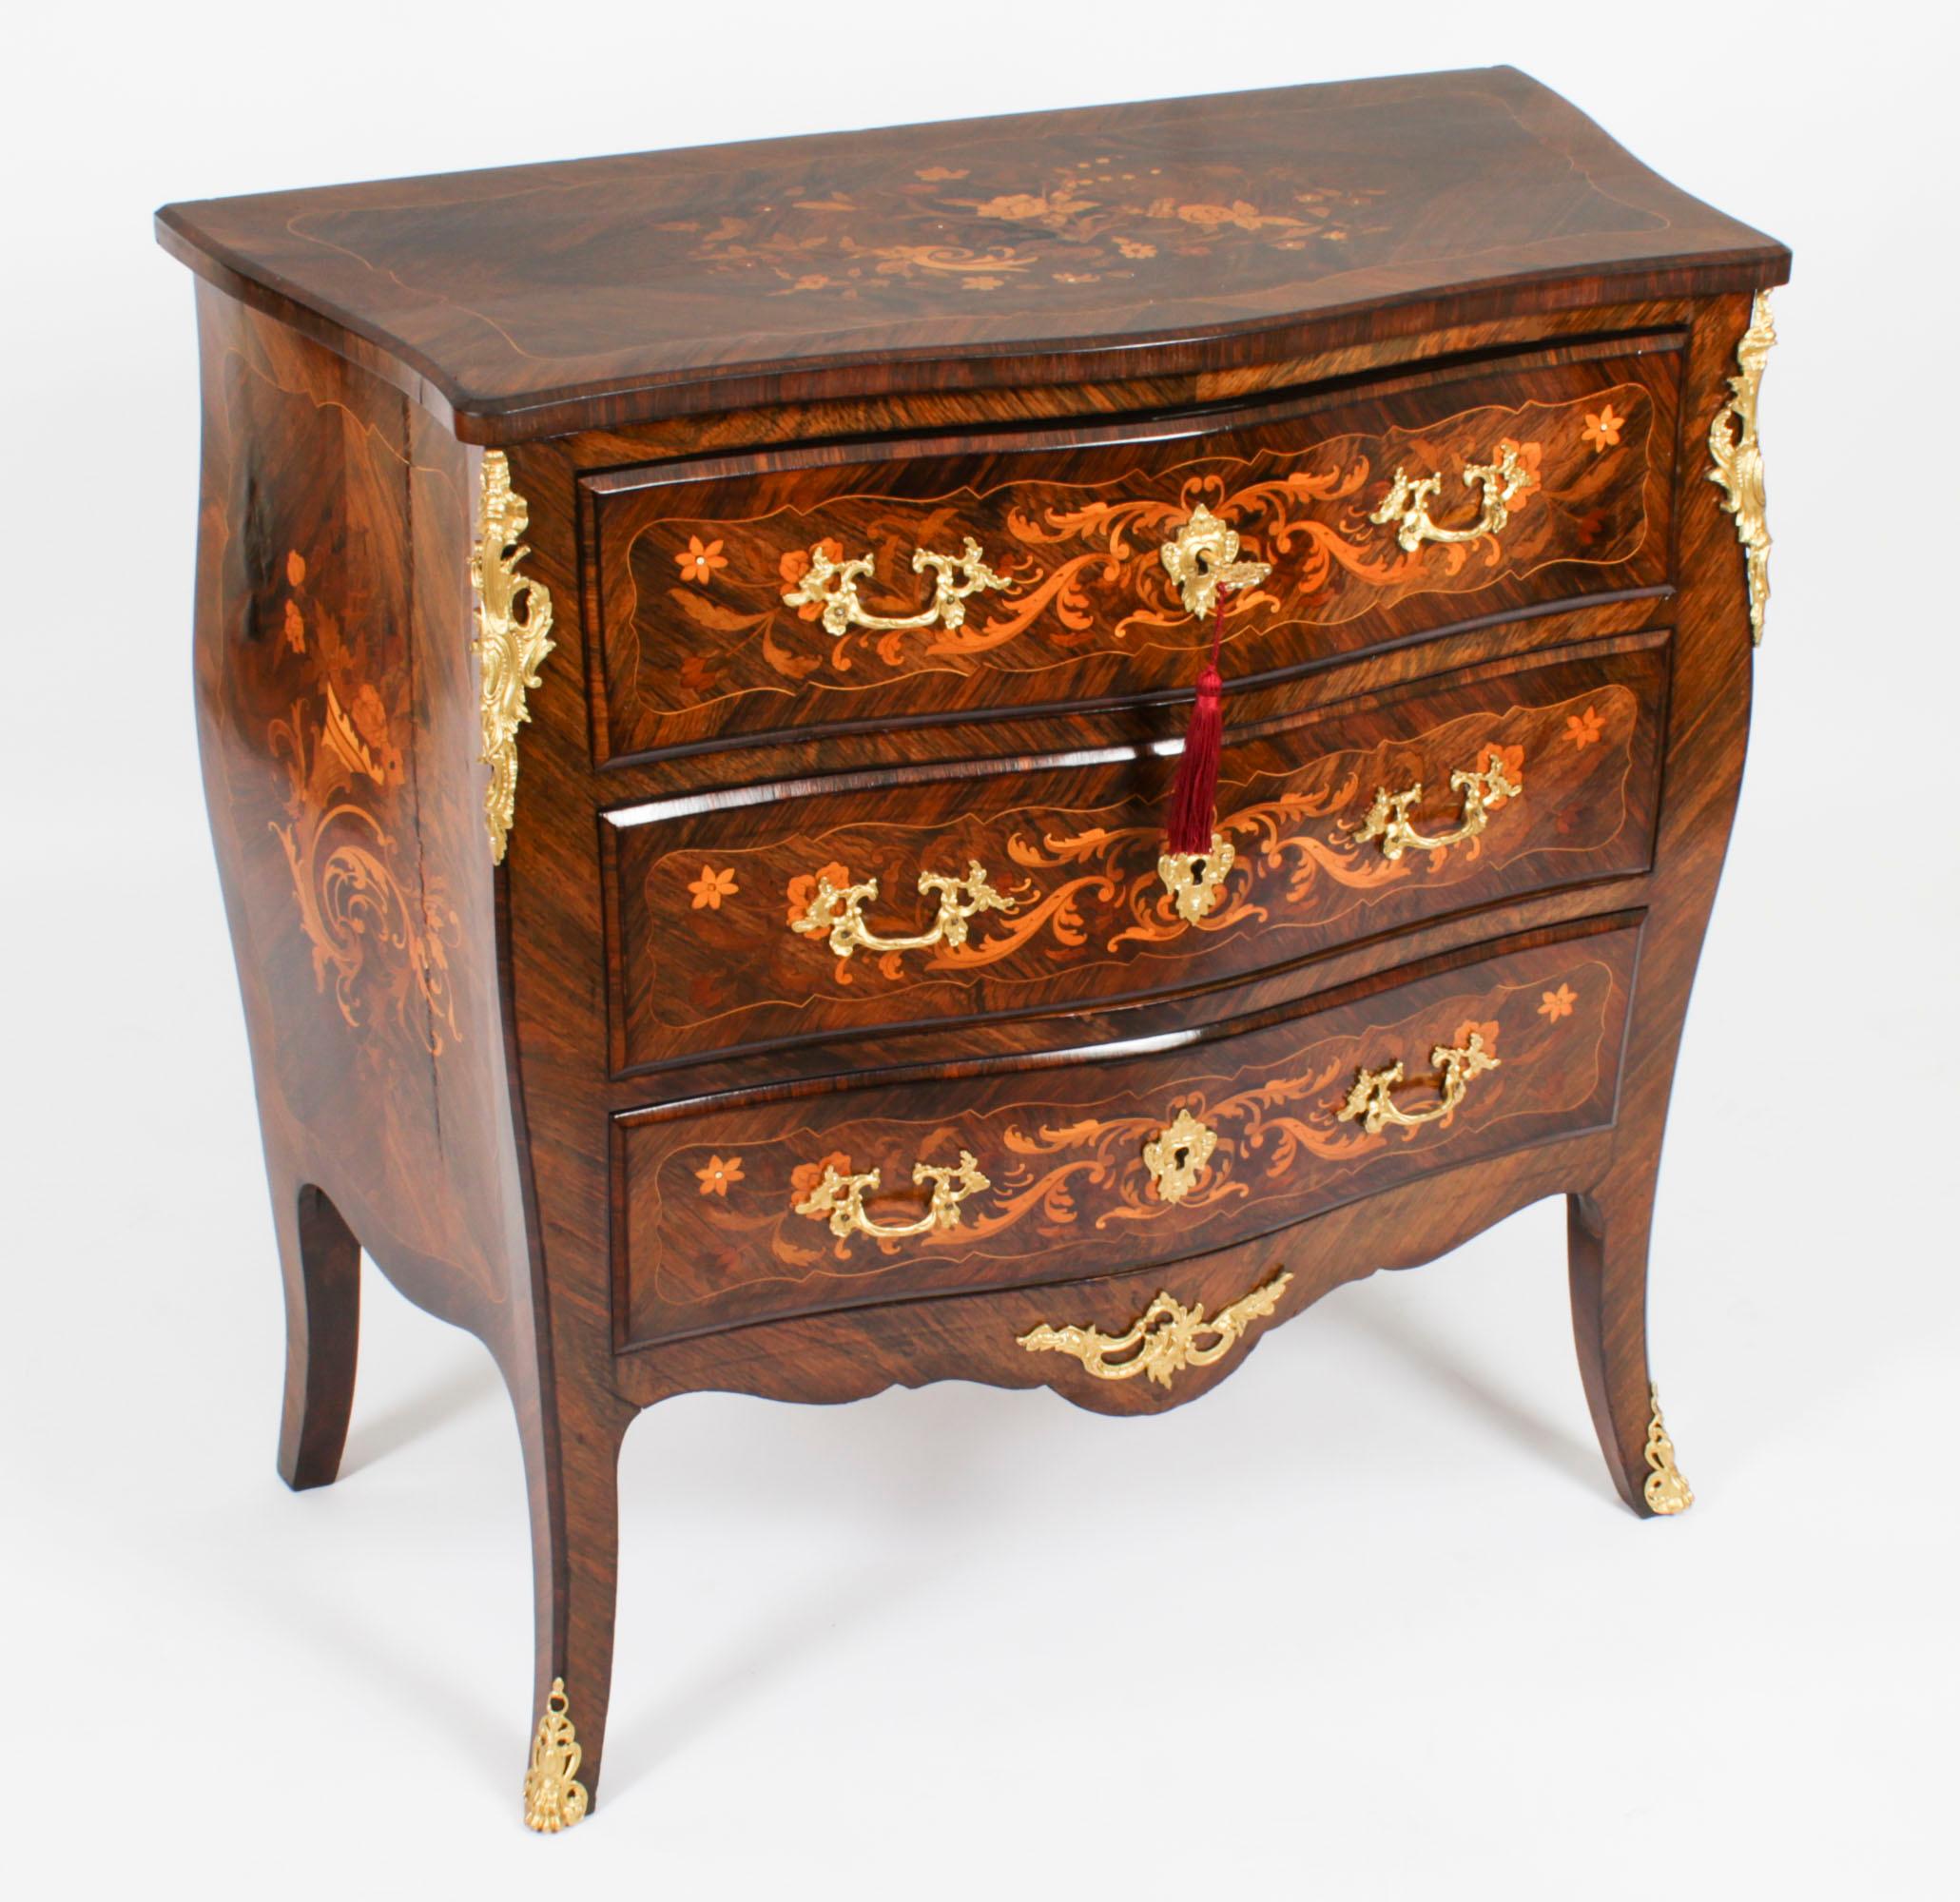 Antique French Louis Revival Marquetry Commode Chest of Drawers 19th Century For Sale 14